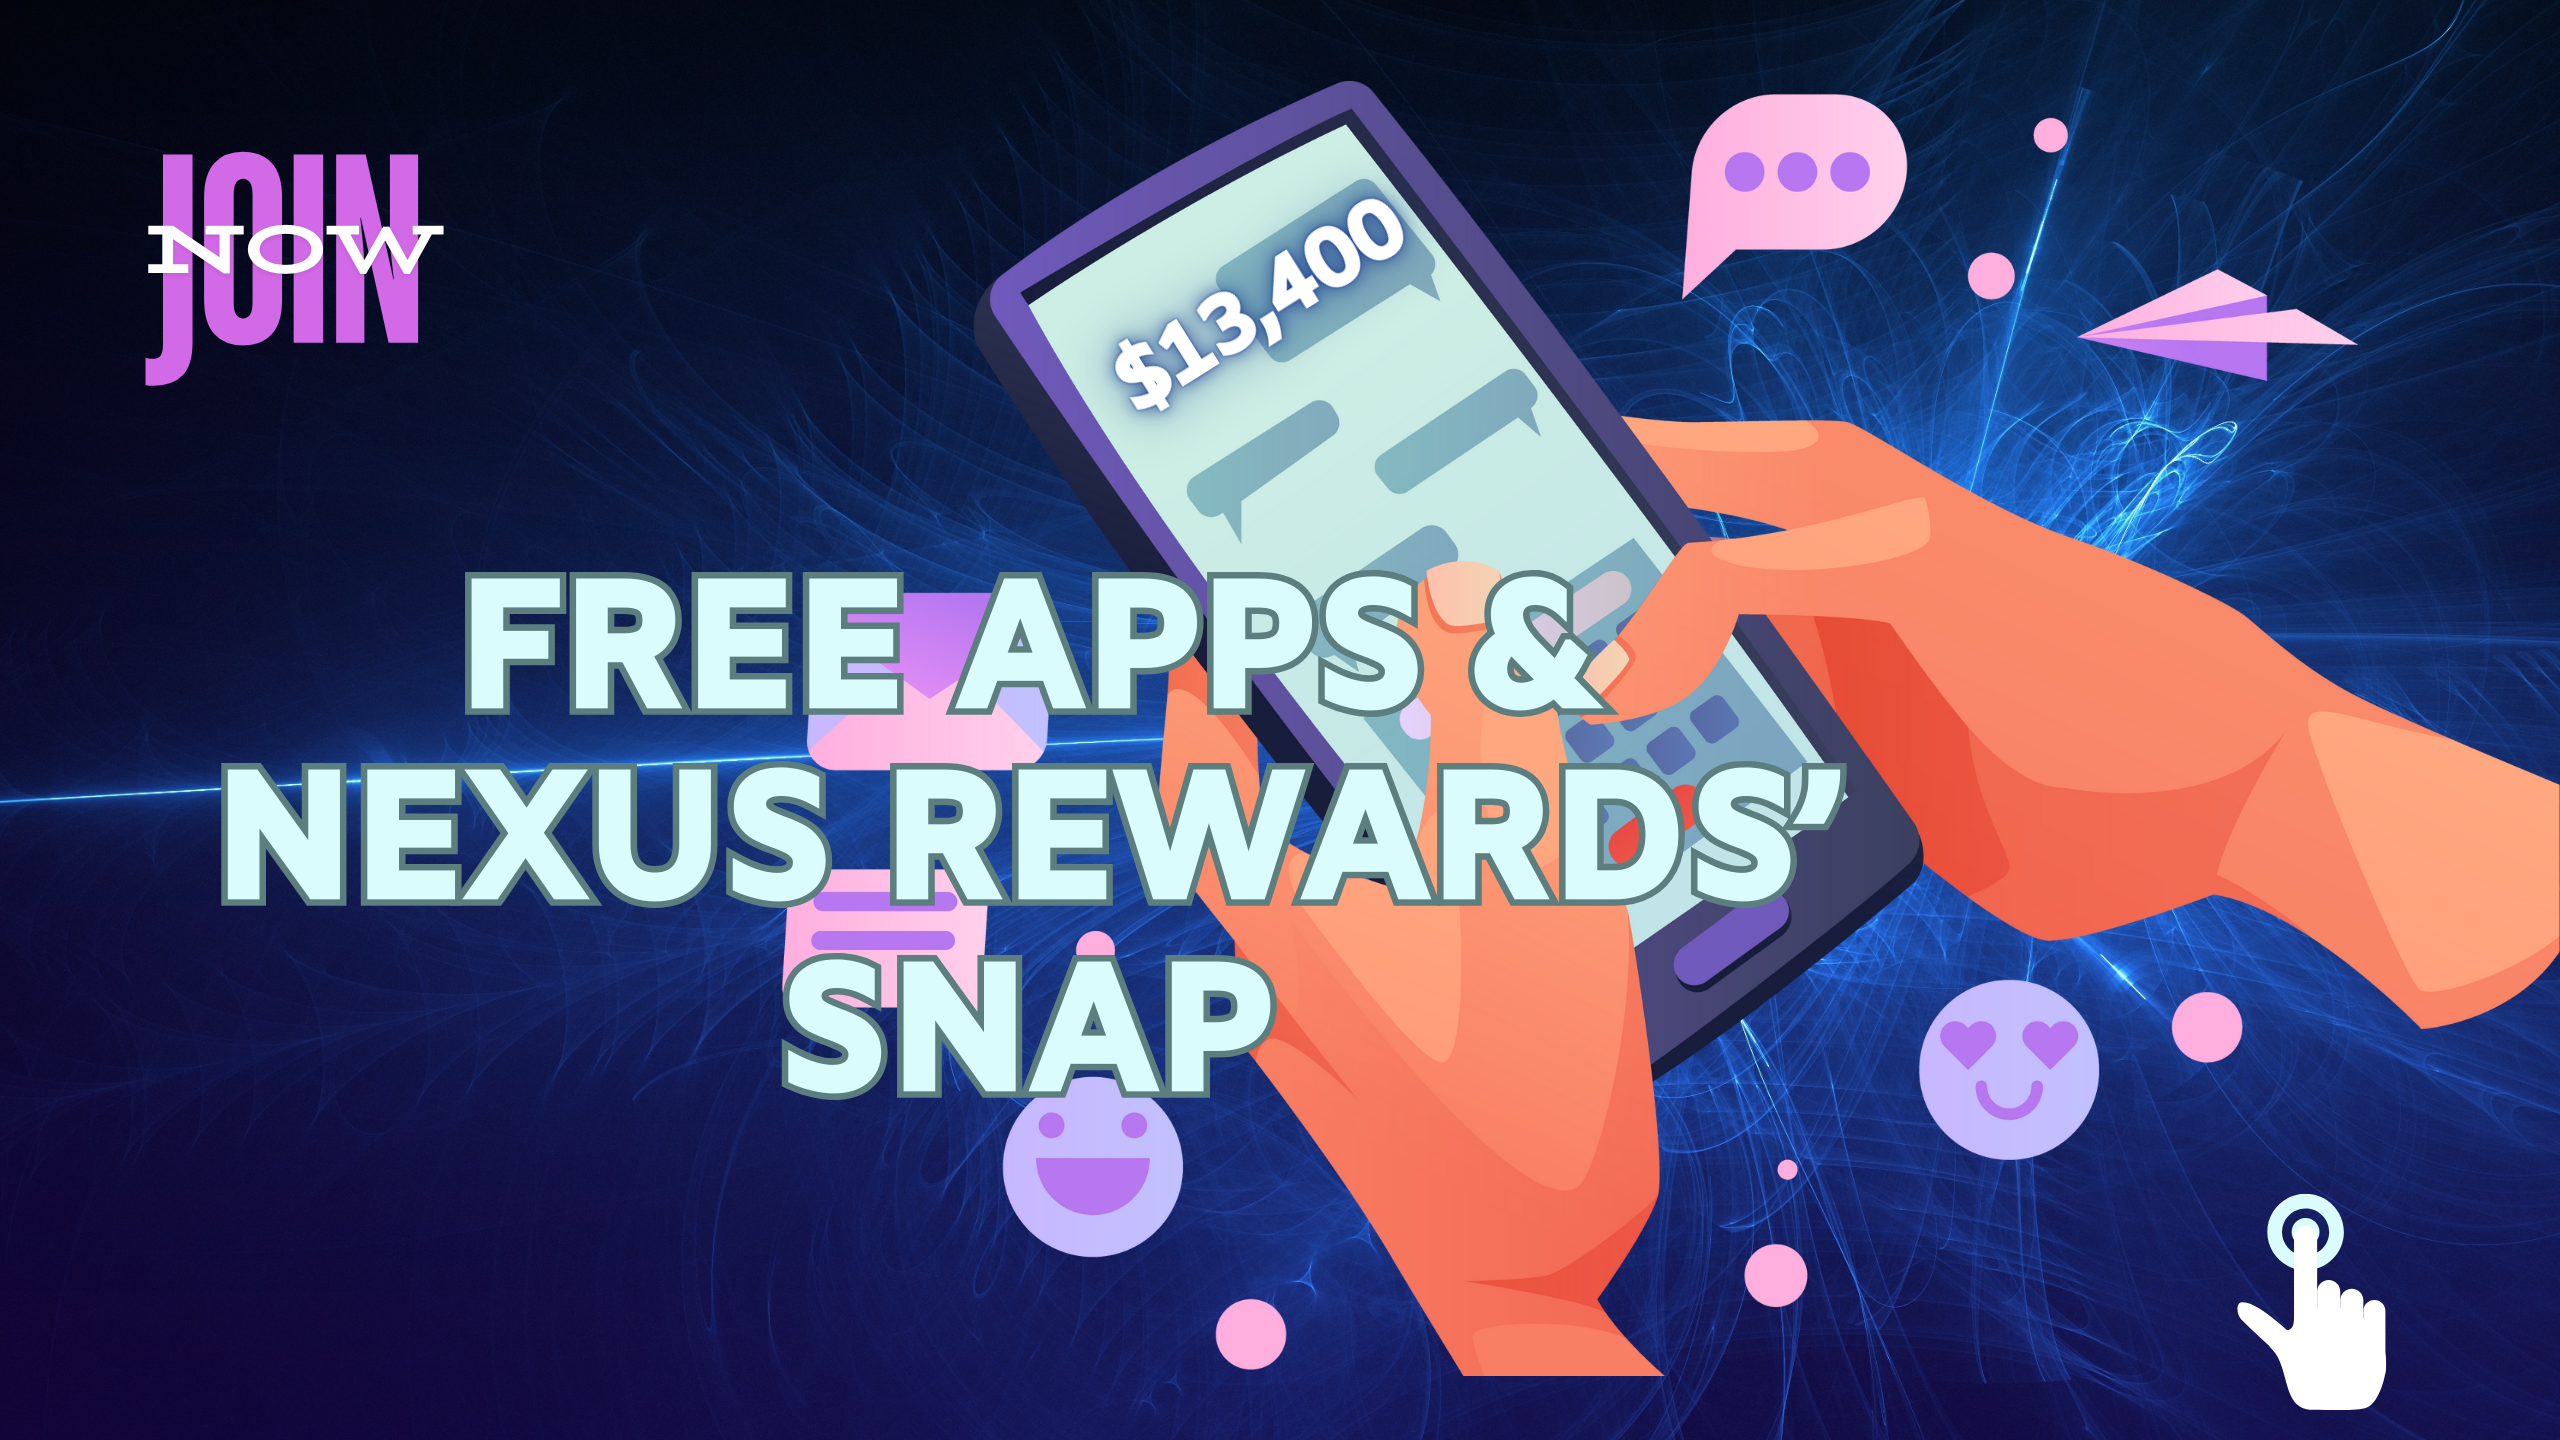 How to Earn $13,400 with Free Cashback Apps and Nexus Reward Snap